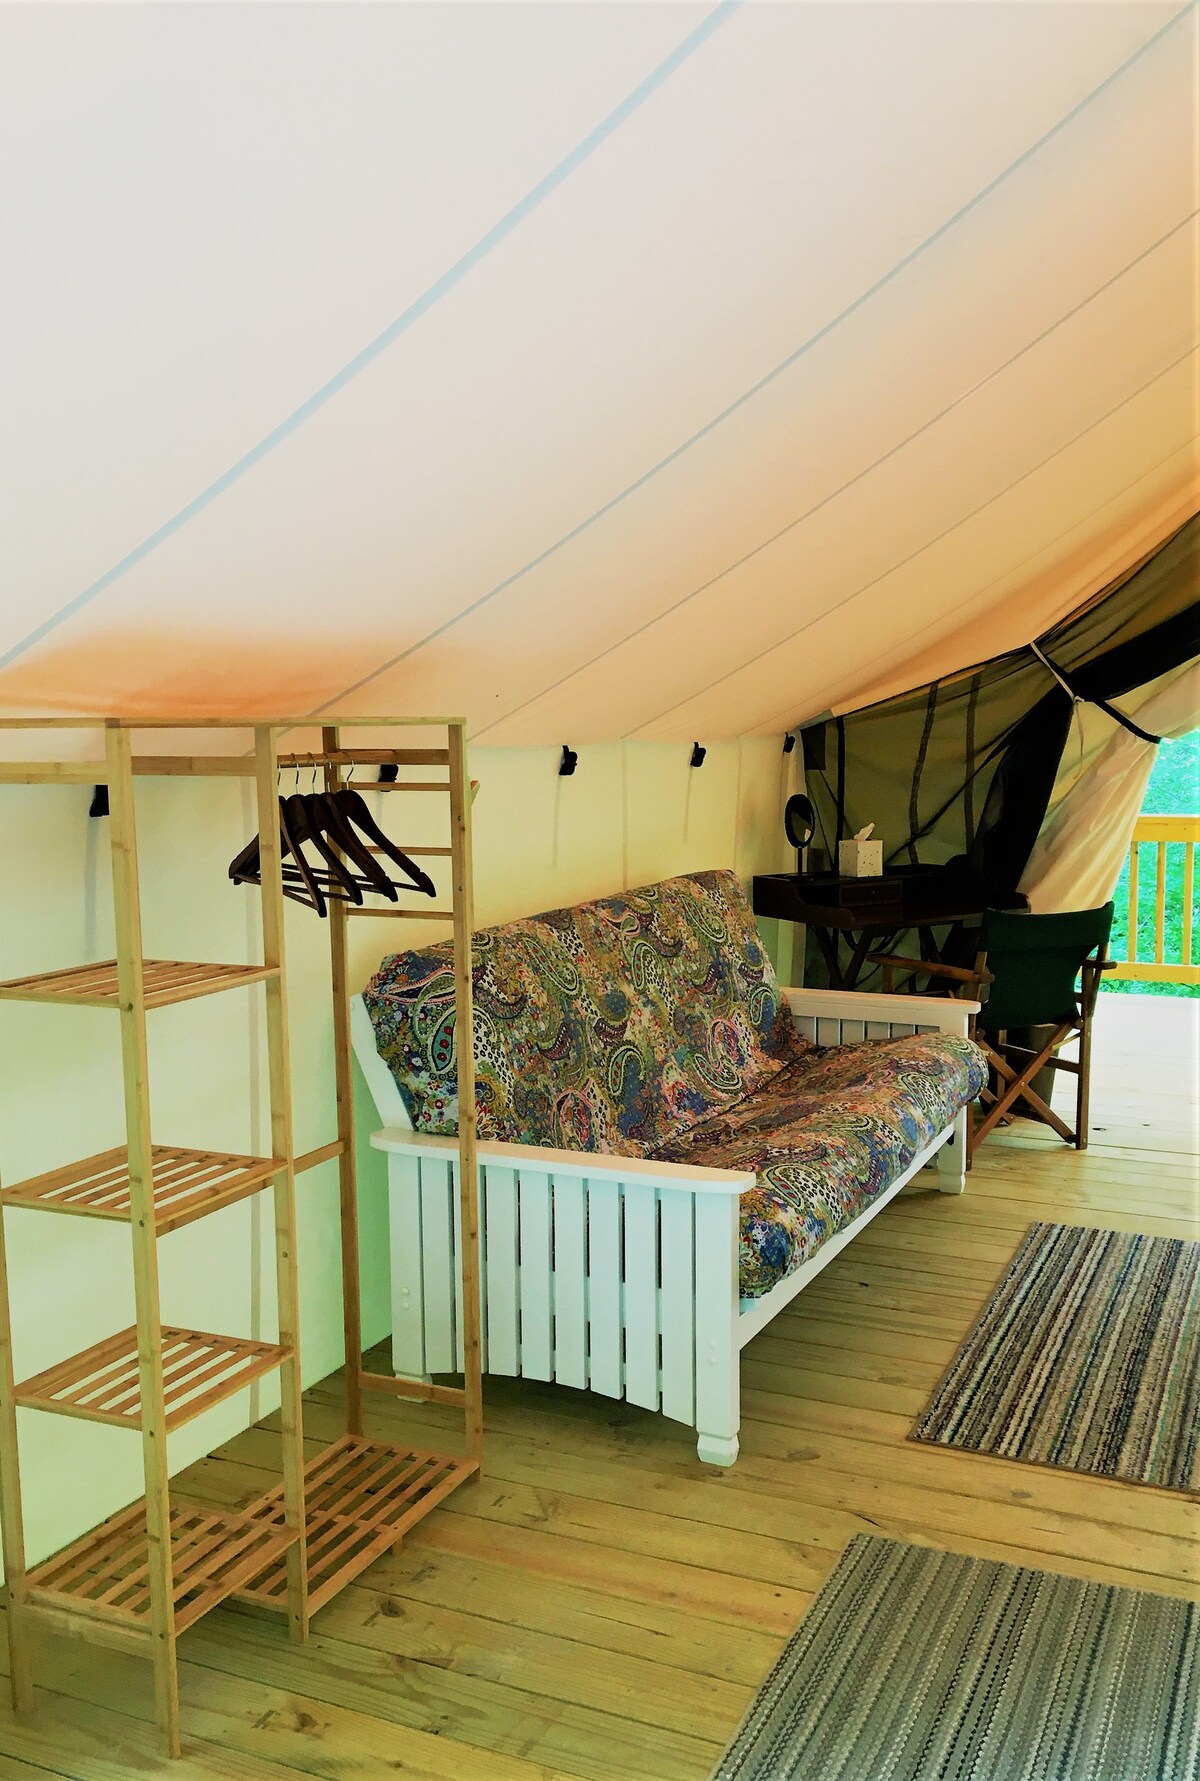 Ash - Safari Tent with King Bed and Futon